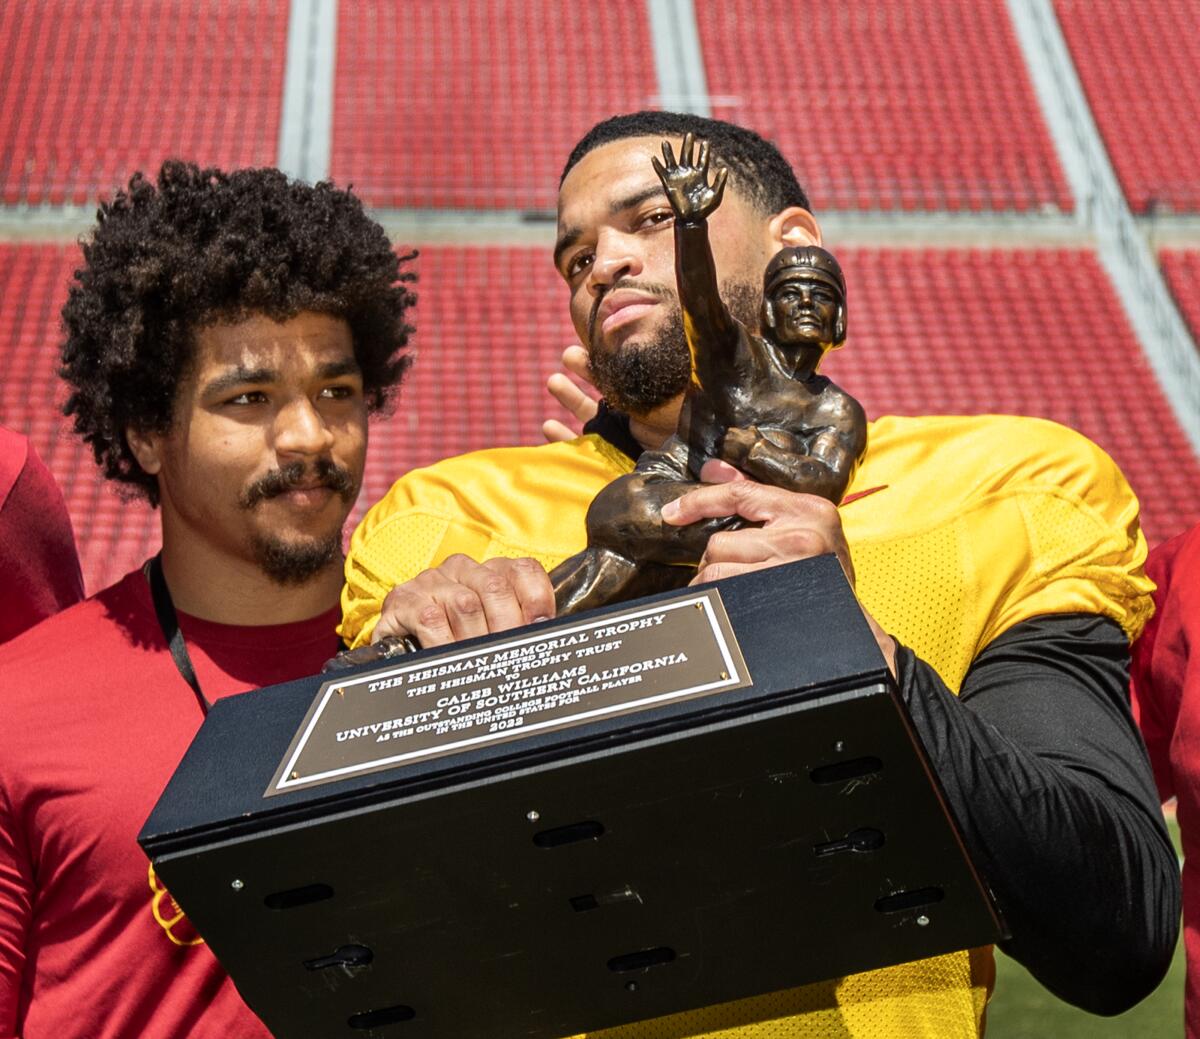 USC quarterback Caleb Williams shows off a replica of his Heisman Trophy in front of former Trojans running back Travis Dye.